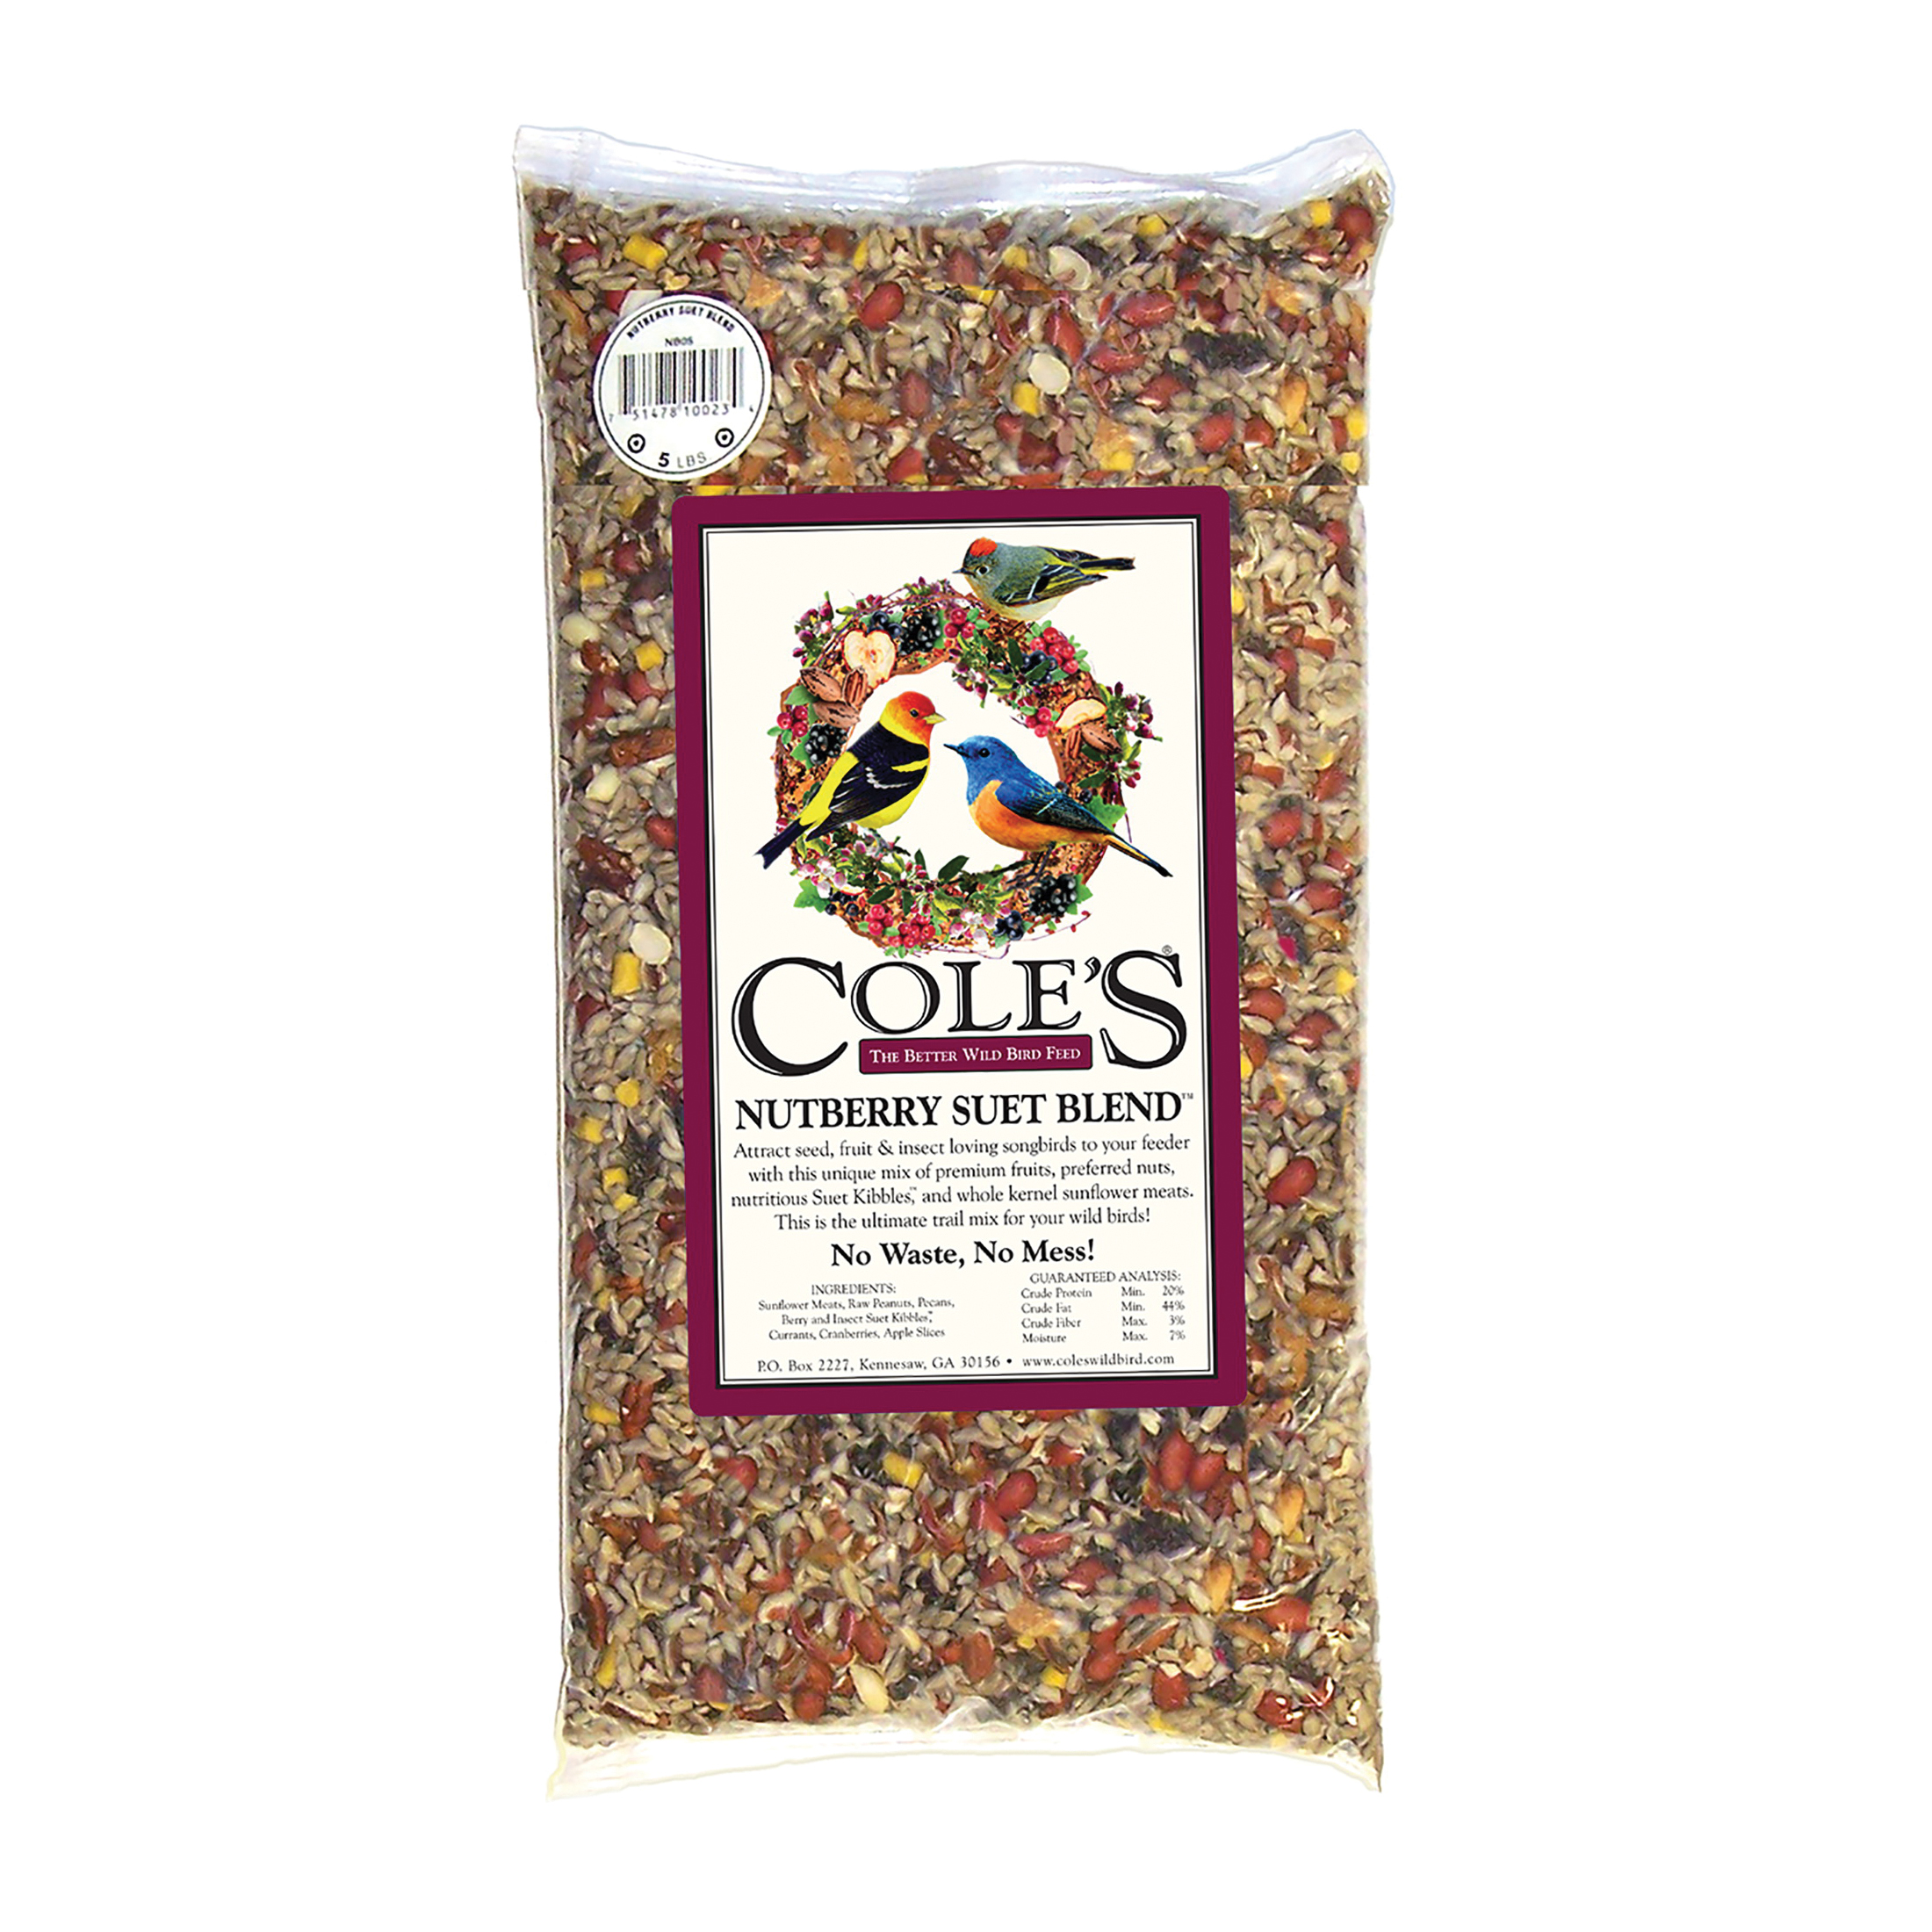 Cole's Nutberry Suet Blend NB20 Blended Bird Seed, 20 lb Bag - 2